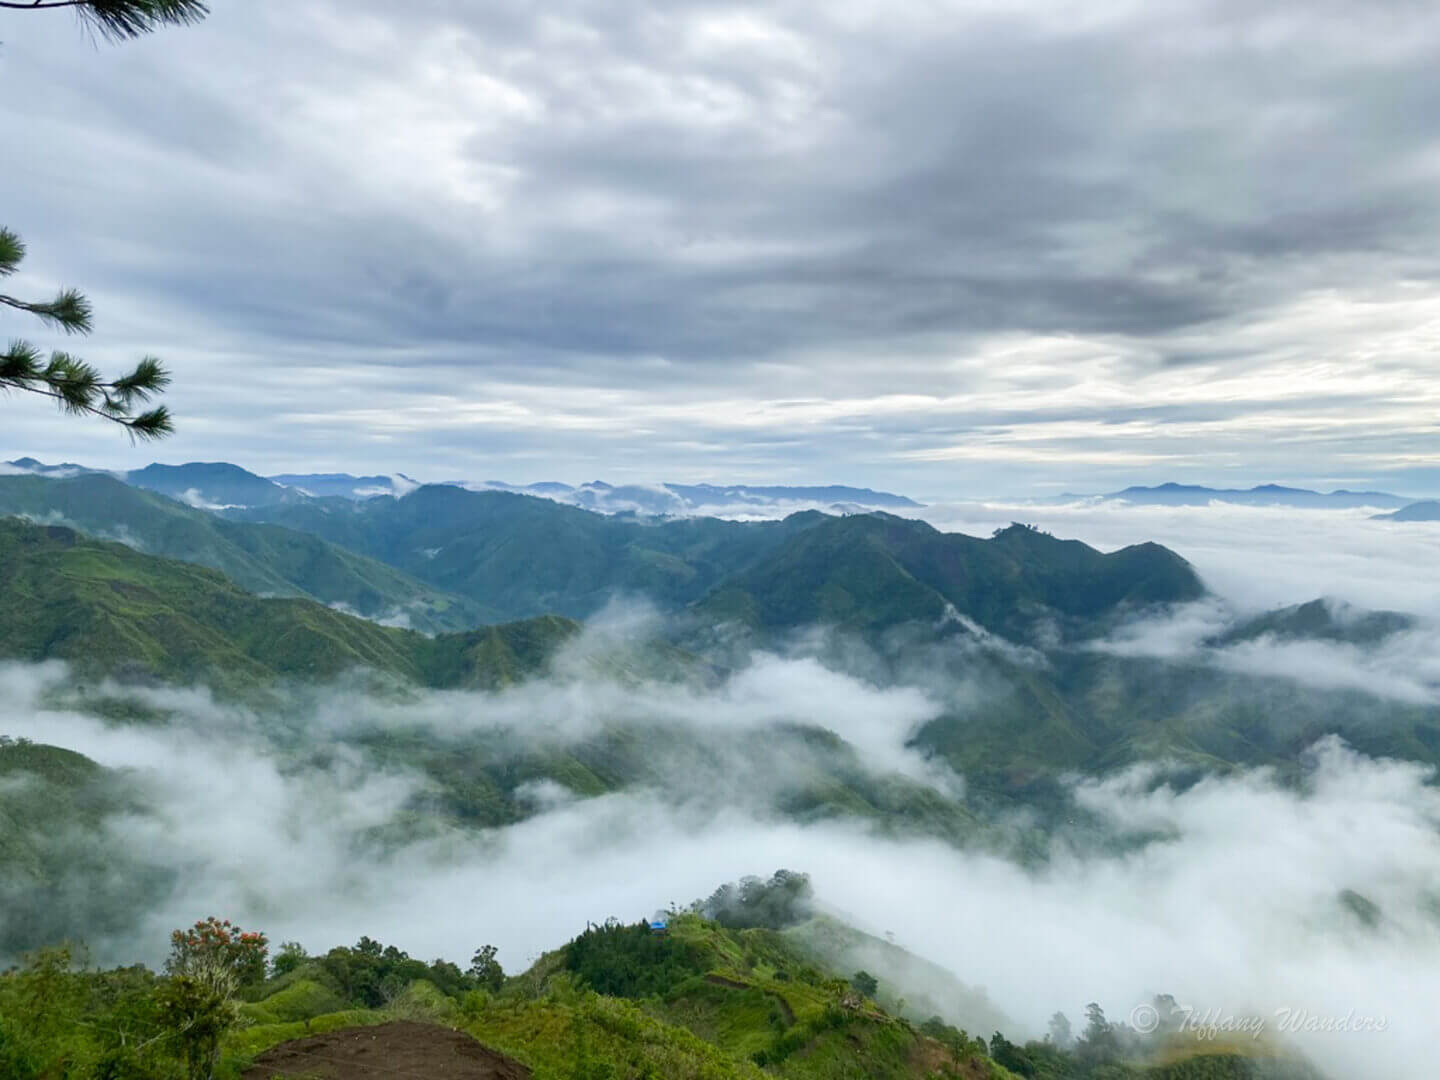 Sea of Clouds in BuDa, Philippines